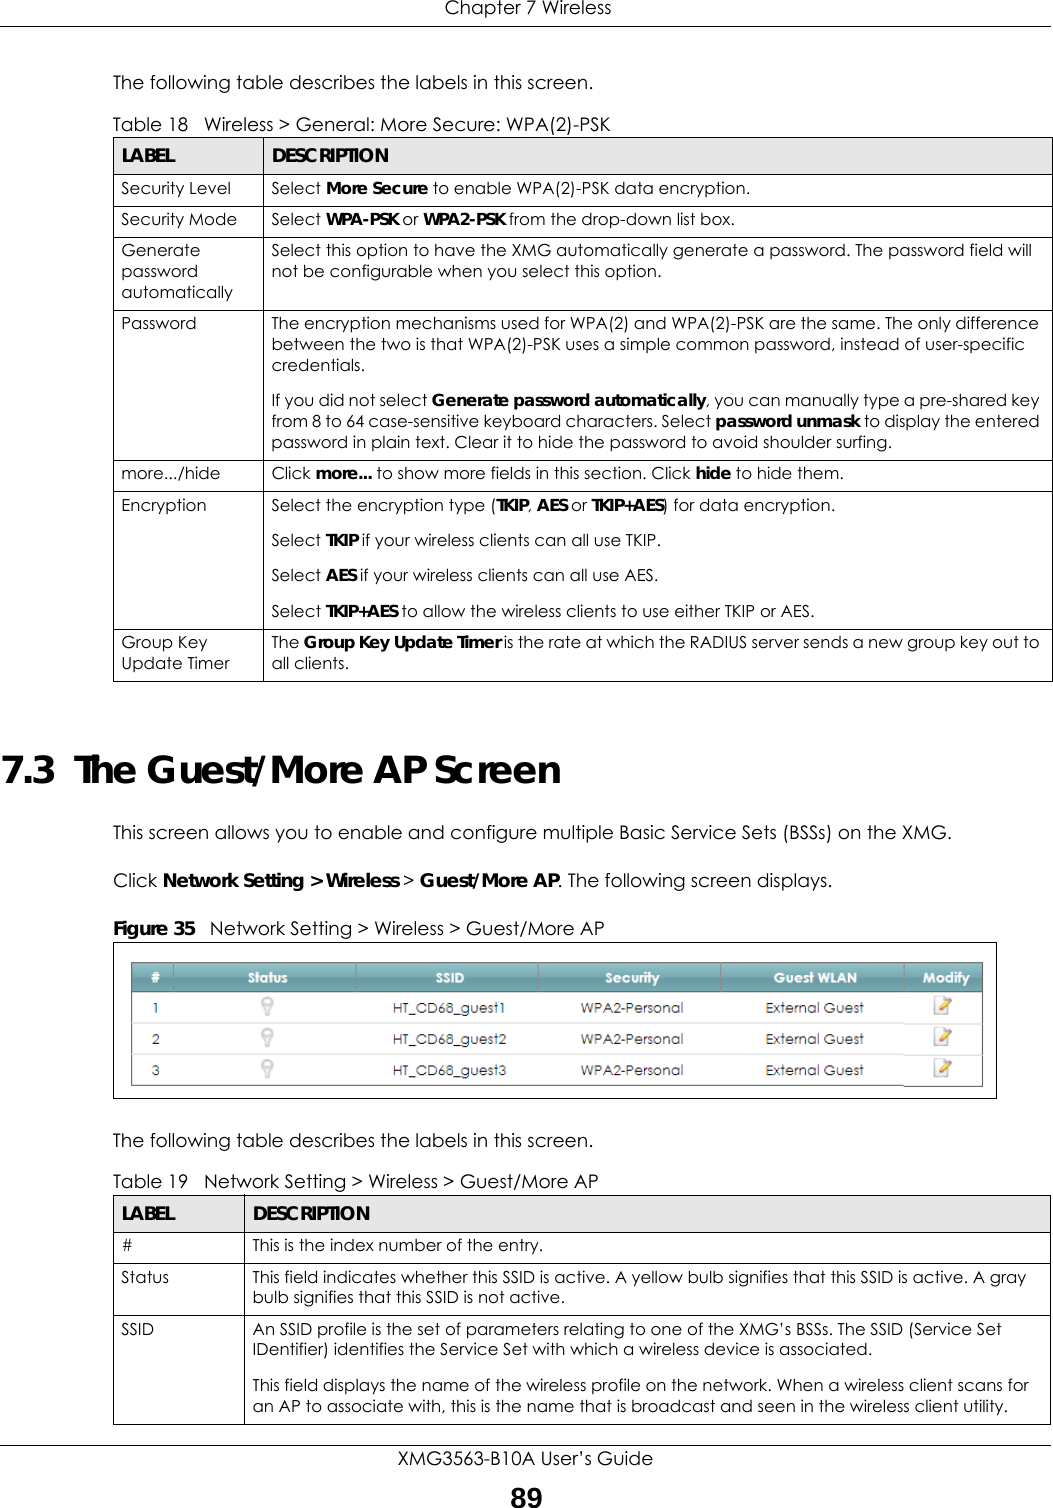  Chapter 7 WirelessXMG3563-B10A User’s Guide89The following table describes the labels in this screen.7.3  The Guest/More AP ScreenThis screen allows you to enable and configure multiple Basic Service Sets (BSSs) on the XMG.Click Network Setting &gt; Wireless &gt; Guest/More AP. The following screen displays.Figure 35   Network Setting &gt; Wireless &gt; Guest/More APThe following table describes the labels in this screen.Table 18   Wireless &gt; General: More Secure: WPA(2)-PSKLABEL DESCRIPTIONSecurity Level Select More Secure to enable WPA(2)-PSK data encryption.Security Mode Select WPA-PSK or WPA2-PSK from the drop-down list box.Generate password automatically Select this option to have the XMG automatically generate a password. The password field will not be configurable when you select this option.Password  The encryption mechanisms used for WPA(2) and WPA(2)-PSK are the same. The only difference between the two is that WPA(2)-PSK uses a simple common password, instead of user-specific credentials.If you did not select Generate password automatically, you can manually type a pre-shared key from 8 to 64 case-sensitive keyboard characters. Select password unmask to display the entered password in plain text. Clear it to hide the password to avoid shoulder surfing.more.../hide Click more... to show more fields in this section. Click hide to hide them.Encryption Select the encryption type (TKIP, AES or TKIP+AES) for data encryption.Select TKIP if your wireless clients can all use TKIP.Select AES if your wireless clients can all use AES.Select TKIP+AES to allow the wireless clients to use either TKIP or AES.Group Key Update TimerThe Group Key Update Timer is the rate at which the RADIUS server sends a new group key out to all clients. Table 19   Network Setting &gt; Wireless &gt; Guest/More APLABEL DESCRIPTION# This is the index number of the entry. Status This field indicates whether this SSID is active. A yellow bulb signifies that this SSID is active. A gray bulb signifies that this SSID is not active.SSID An SSID profile is the set of parameters relating to one of the XMG’s BSSs. The SSID (Service Set IDentifier) identifies the Service Set with which a wireless device is associated. This field displays the name of the wireless profile on the network. When a wireless client scans for an AP to associate with, this is the name that is broadcast and seen in the wireless client utility.